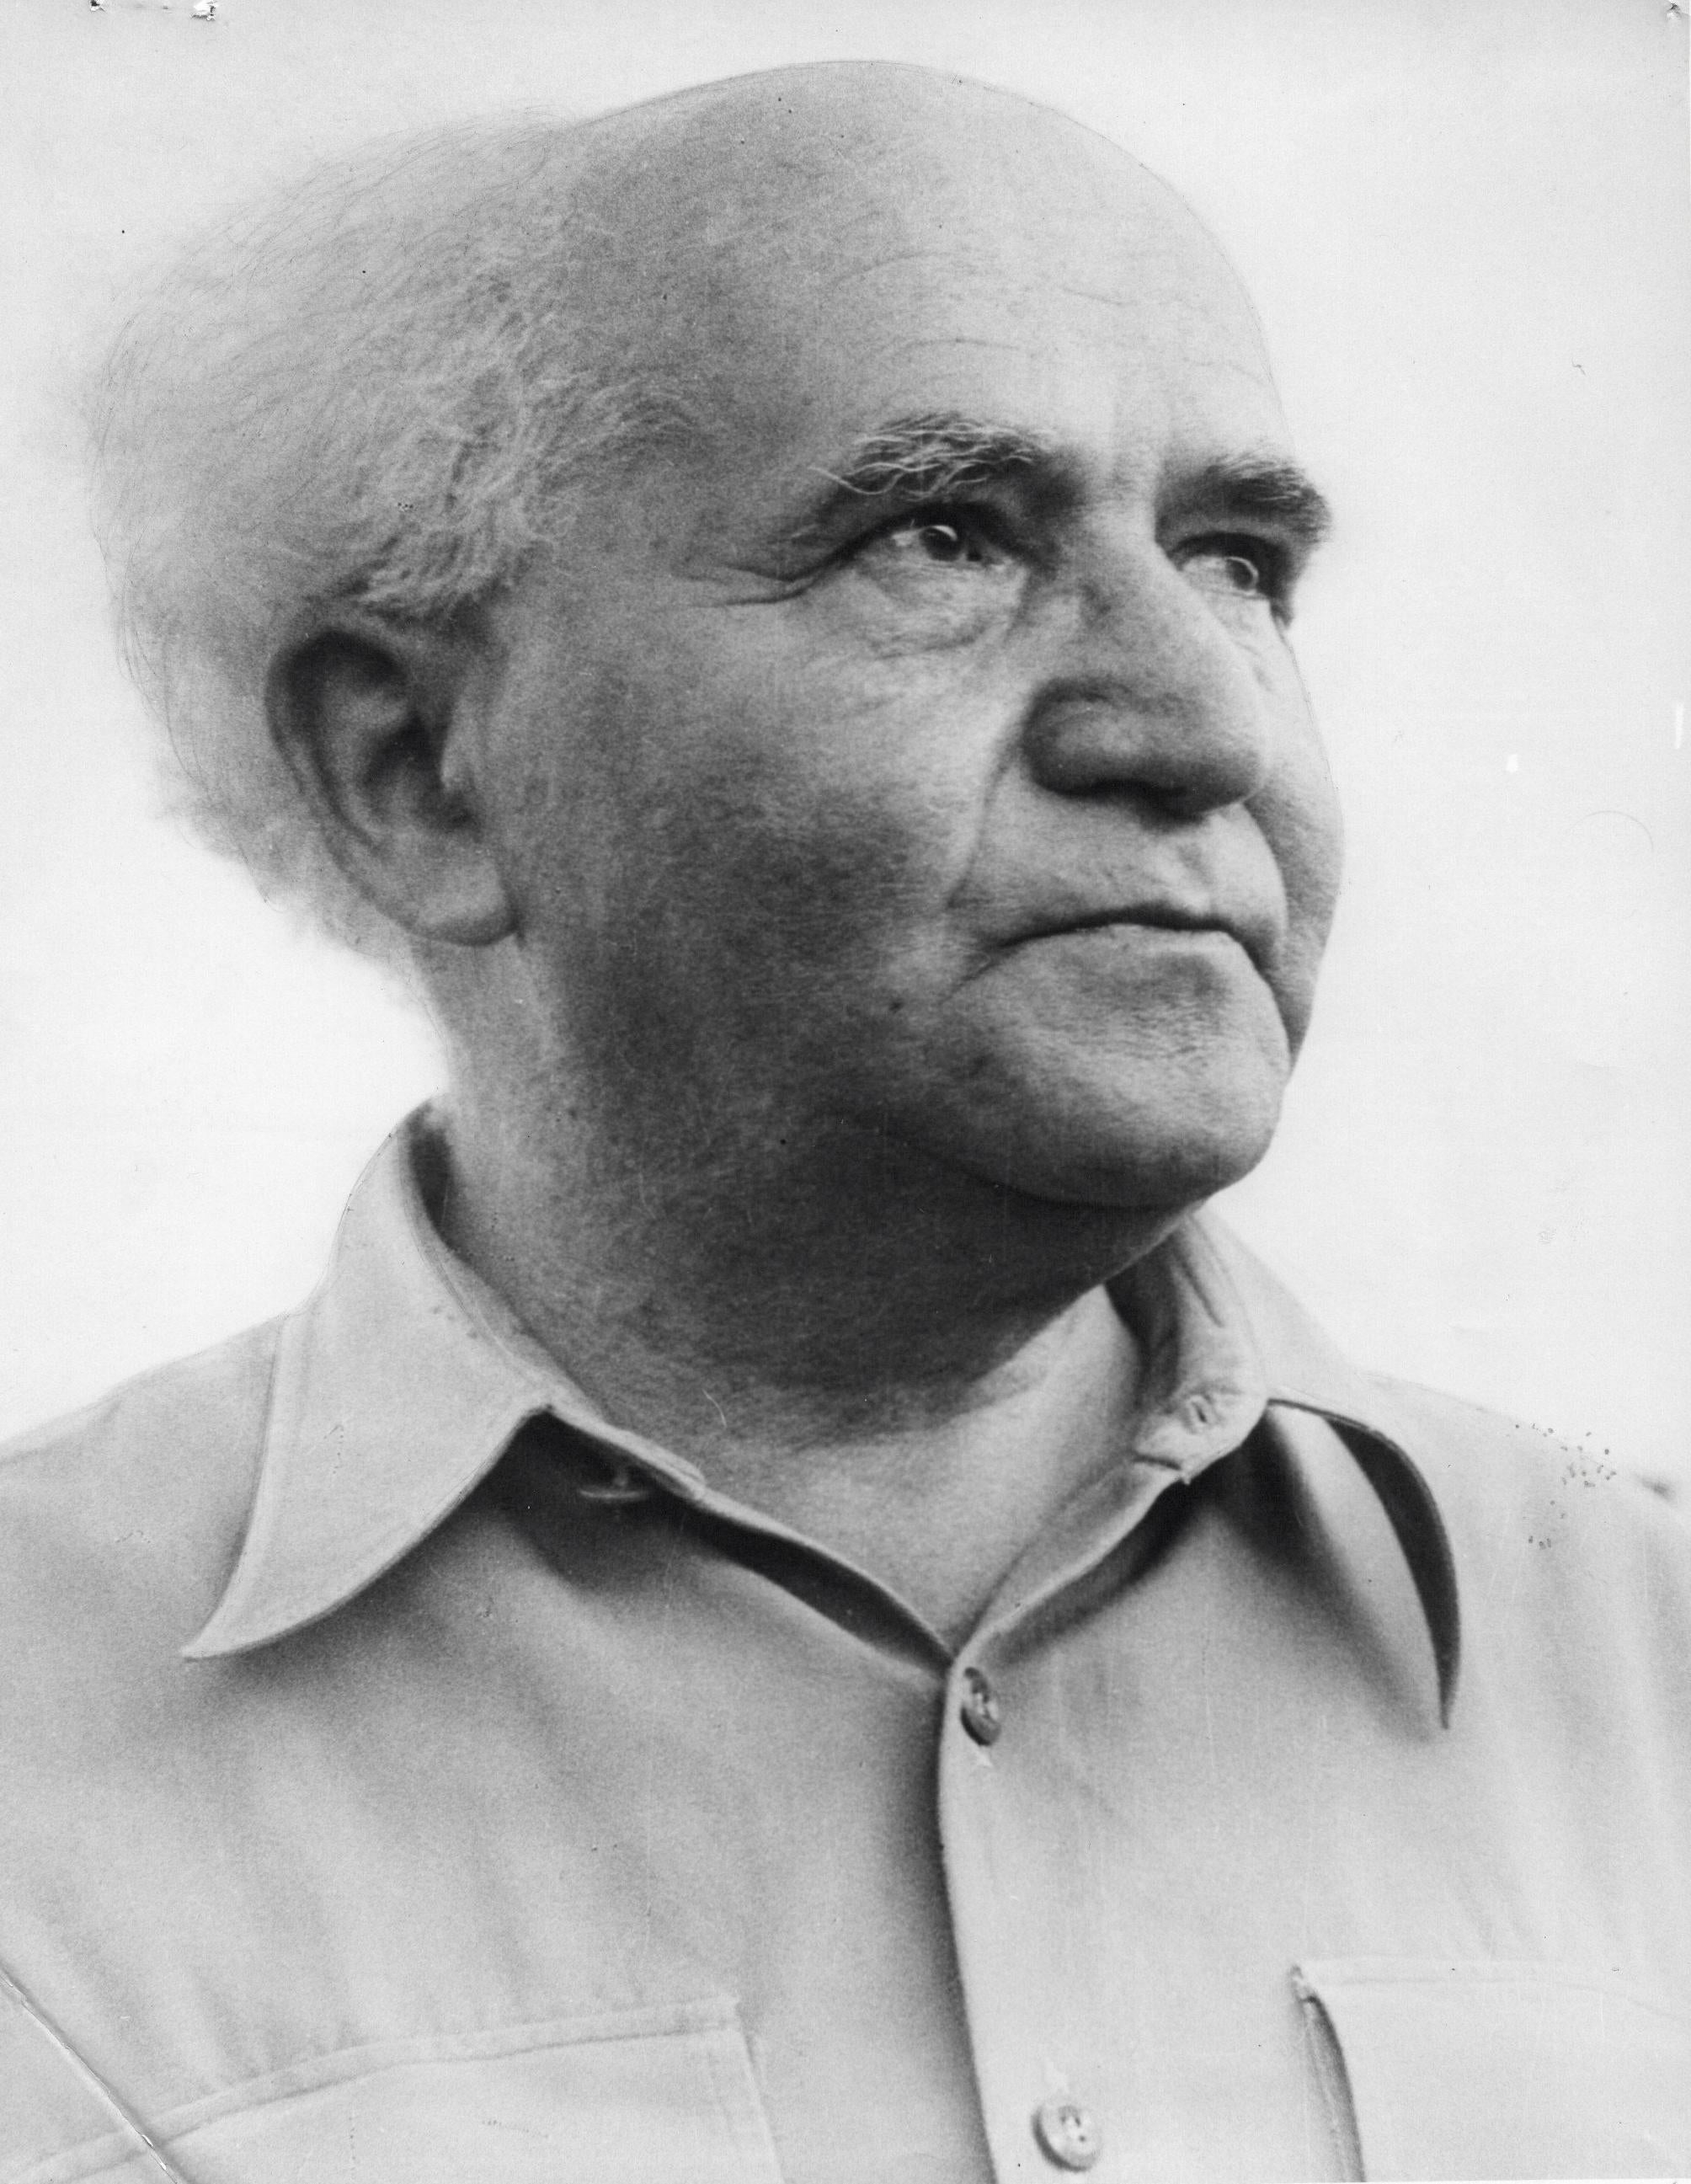 Unknown Black and White Photograph - Ben Gurion: Prime Minister of Israel Vintage Original Photograph